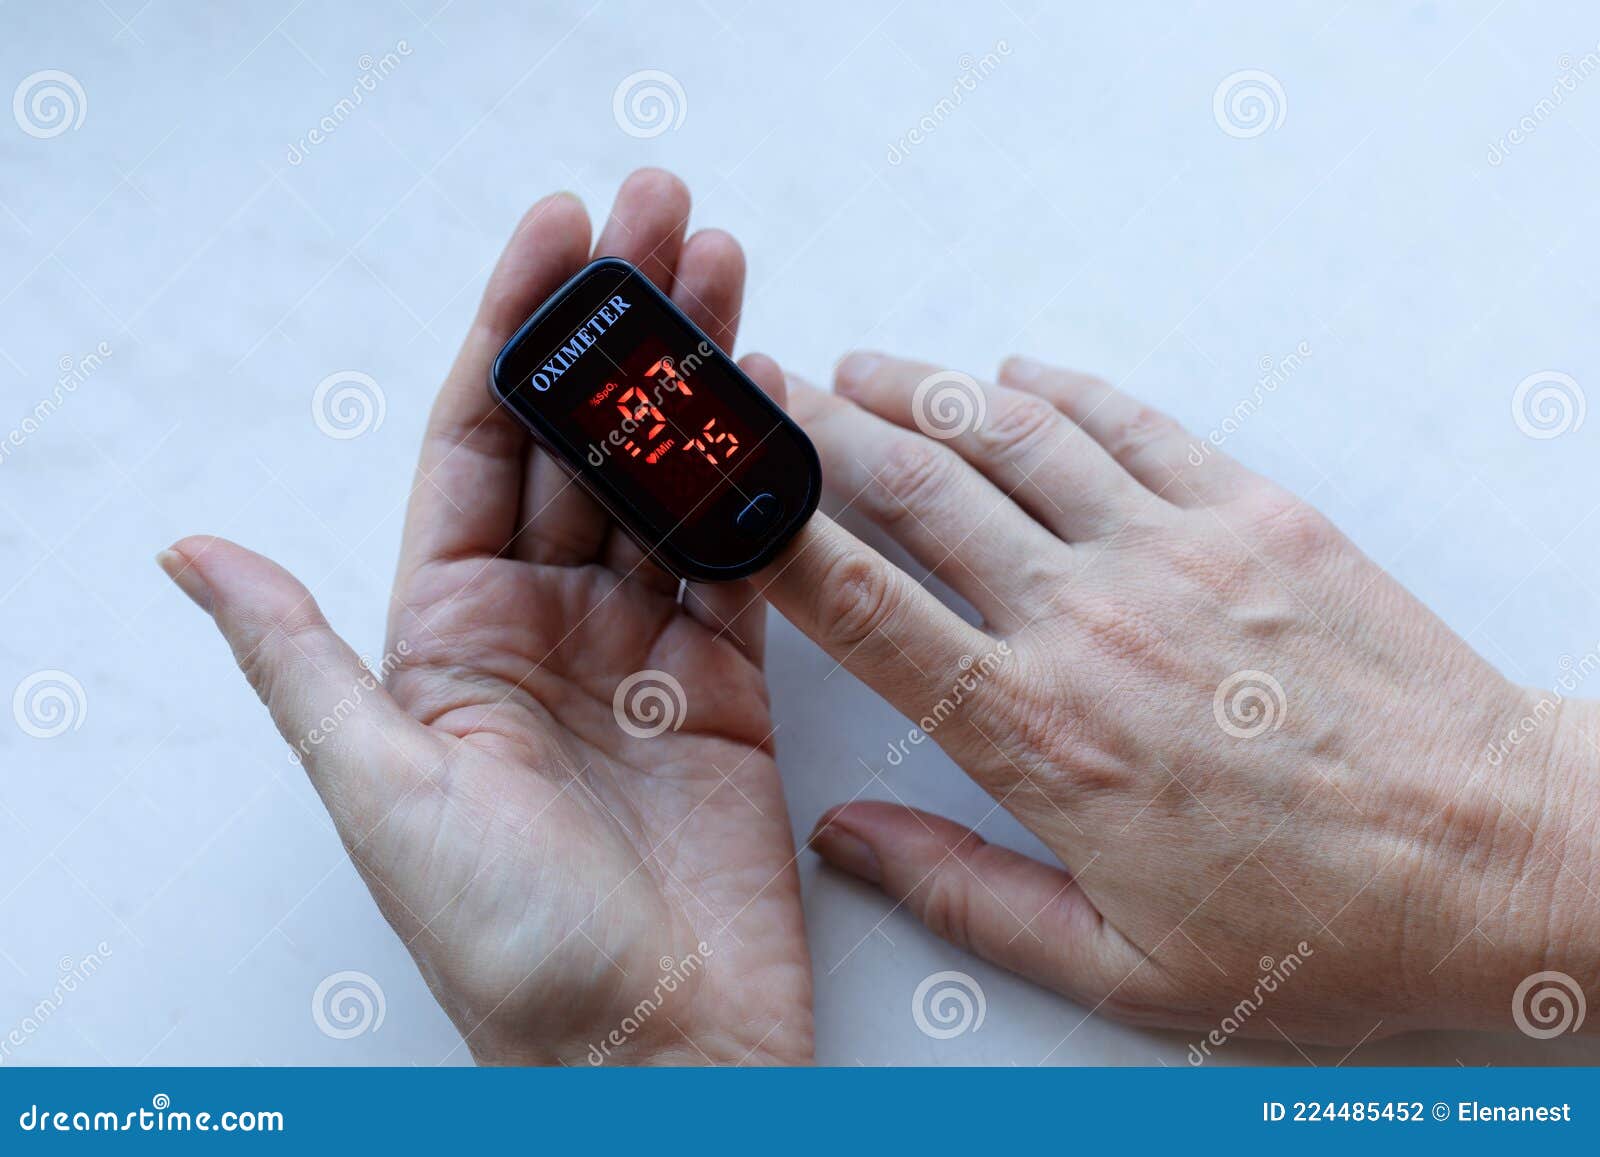 measuring of oxygen level in blood with home oximeter, oximeter in woman`s hands